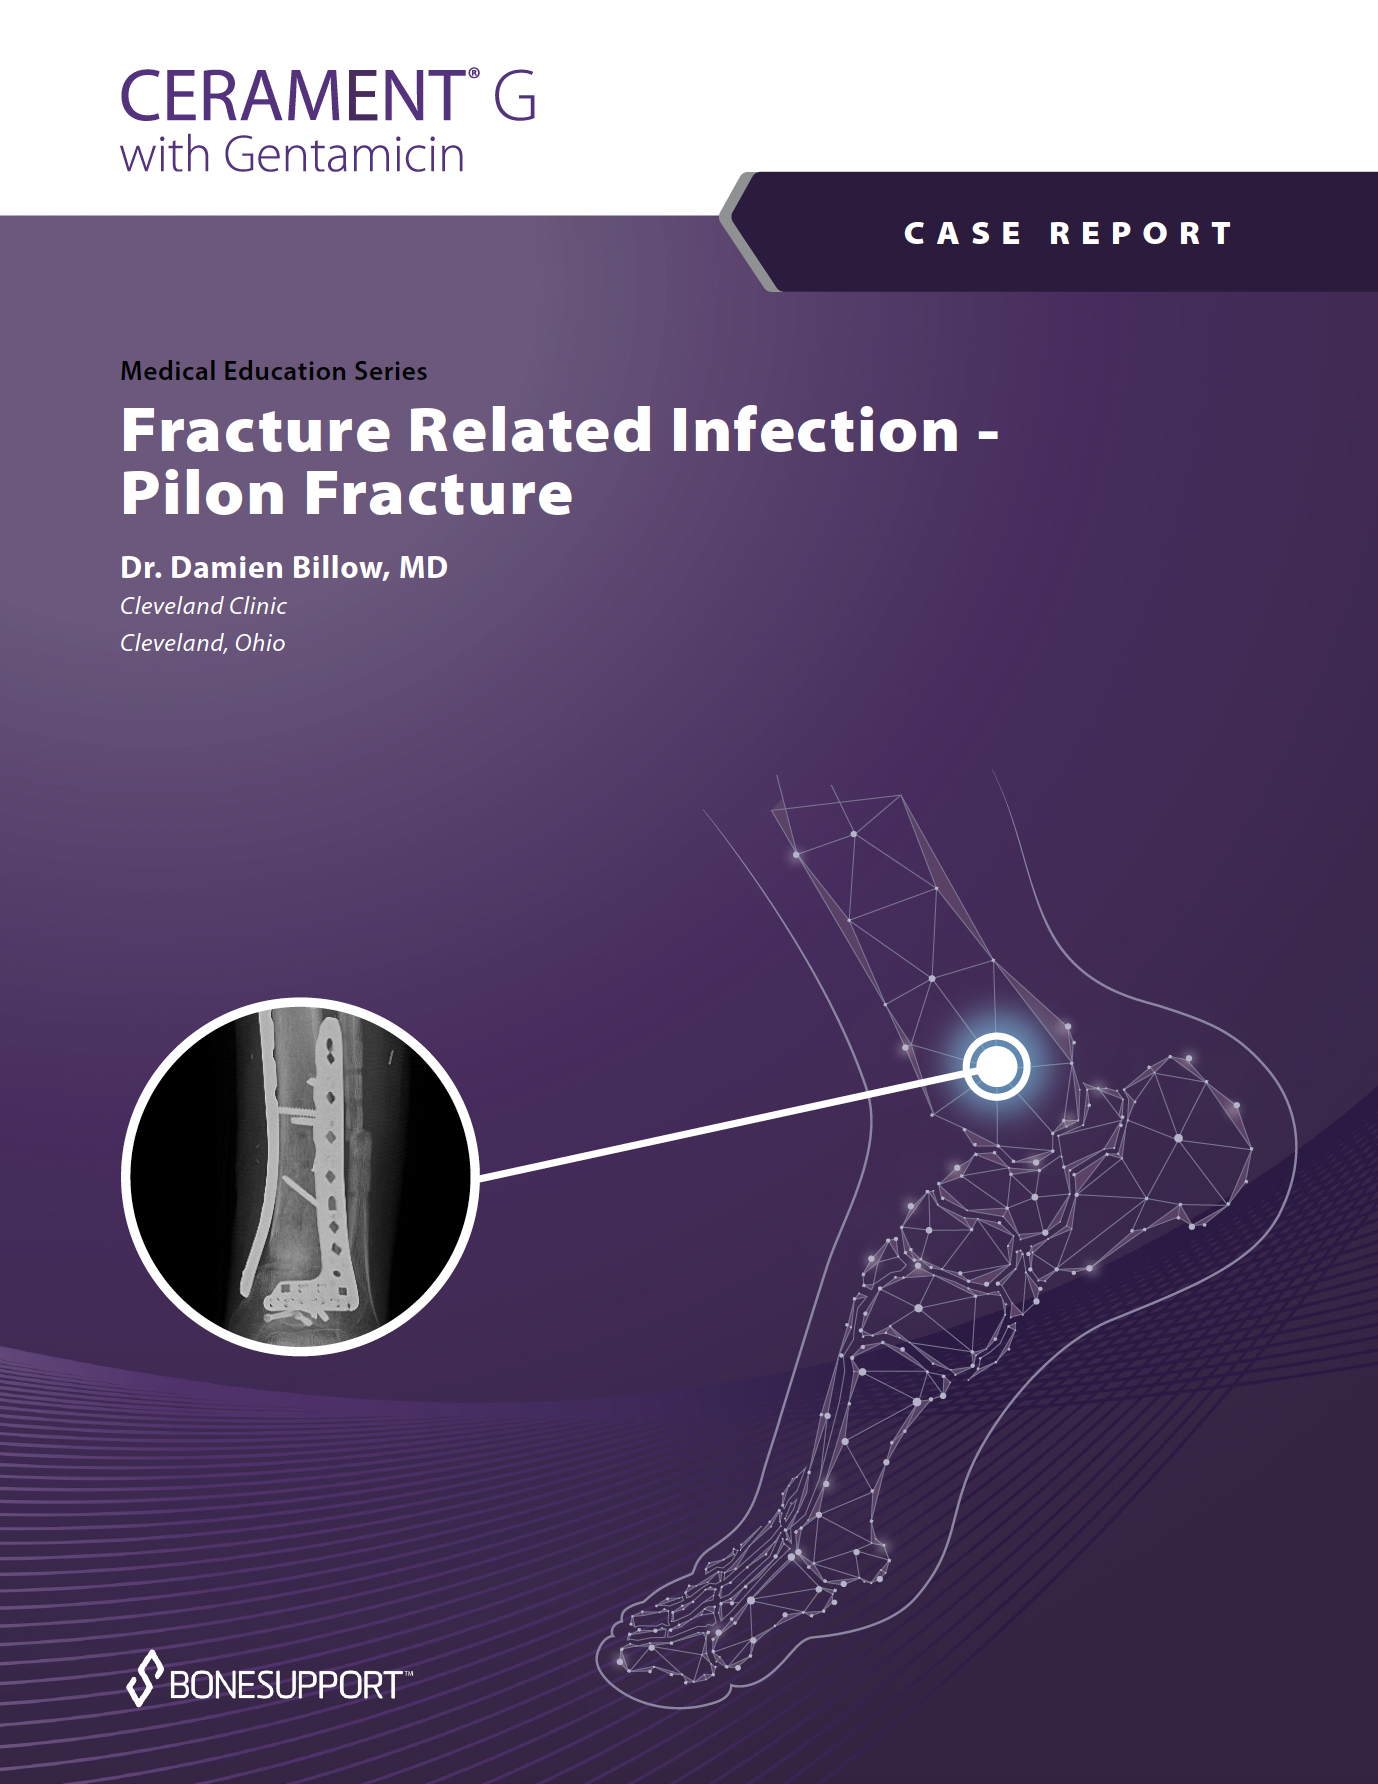 Fracture Related Infection – Pilon Fracture